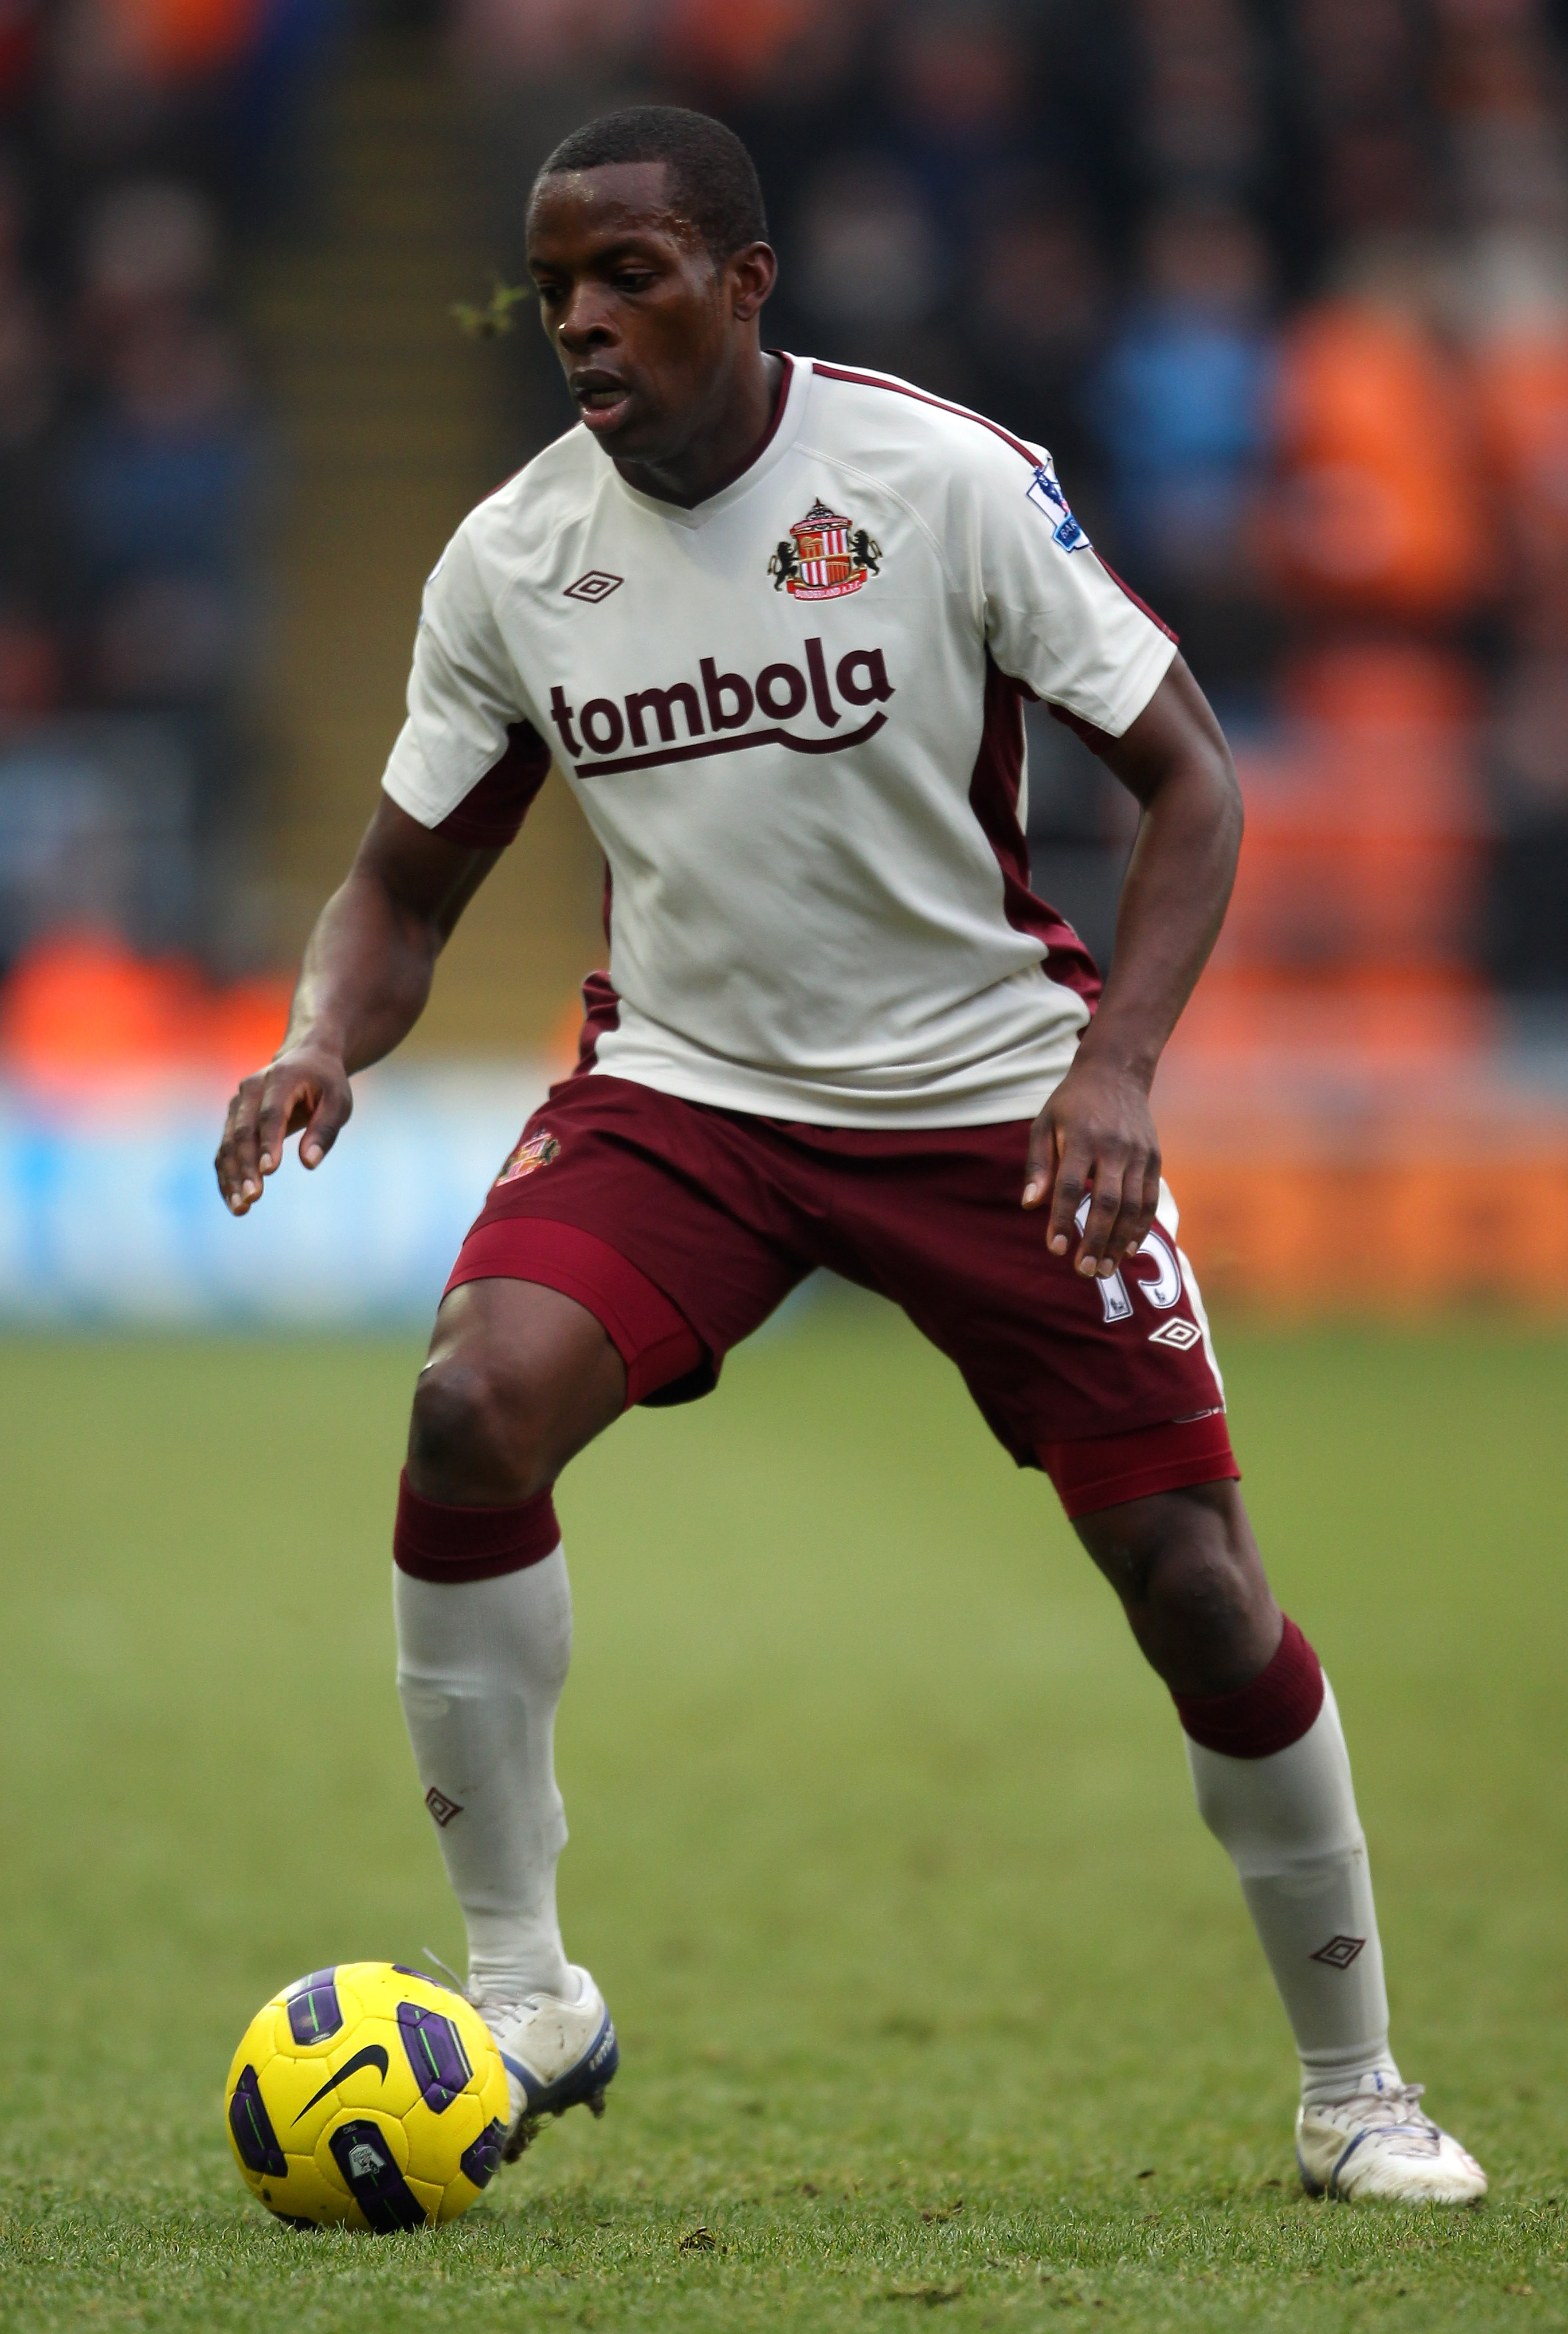 BLACKPOOL, ENGLAND - JANUARY 22:  Nedum Onuoha of Sunderland during the Barclays Premier League match between Blackpool and Sunderland at Bloomfield Road on January 22, 2011 in Blackpool, England.  (Photo by Alex Livesey/Getty Images)